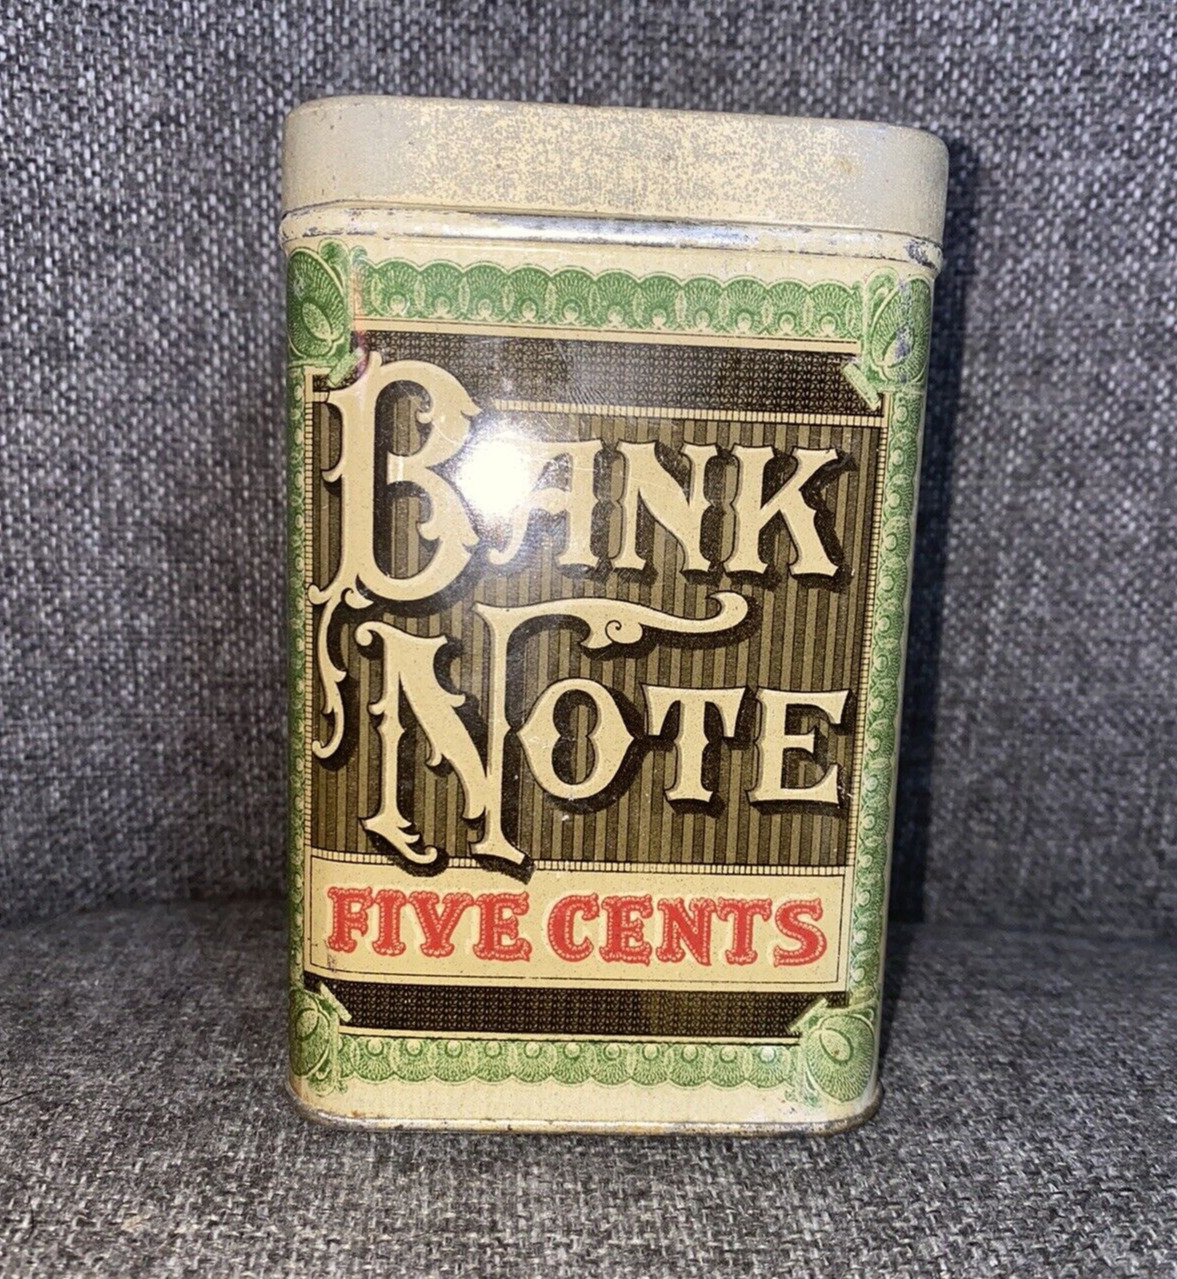 RARE 1920s Bank Note Cigars 5 cents Tin (Empty) - Vintage Antique Tobacco